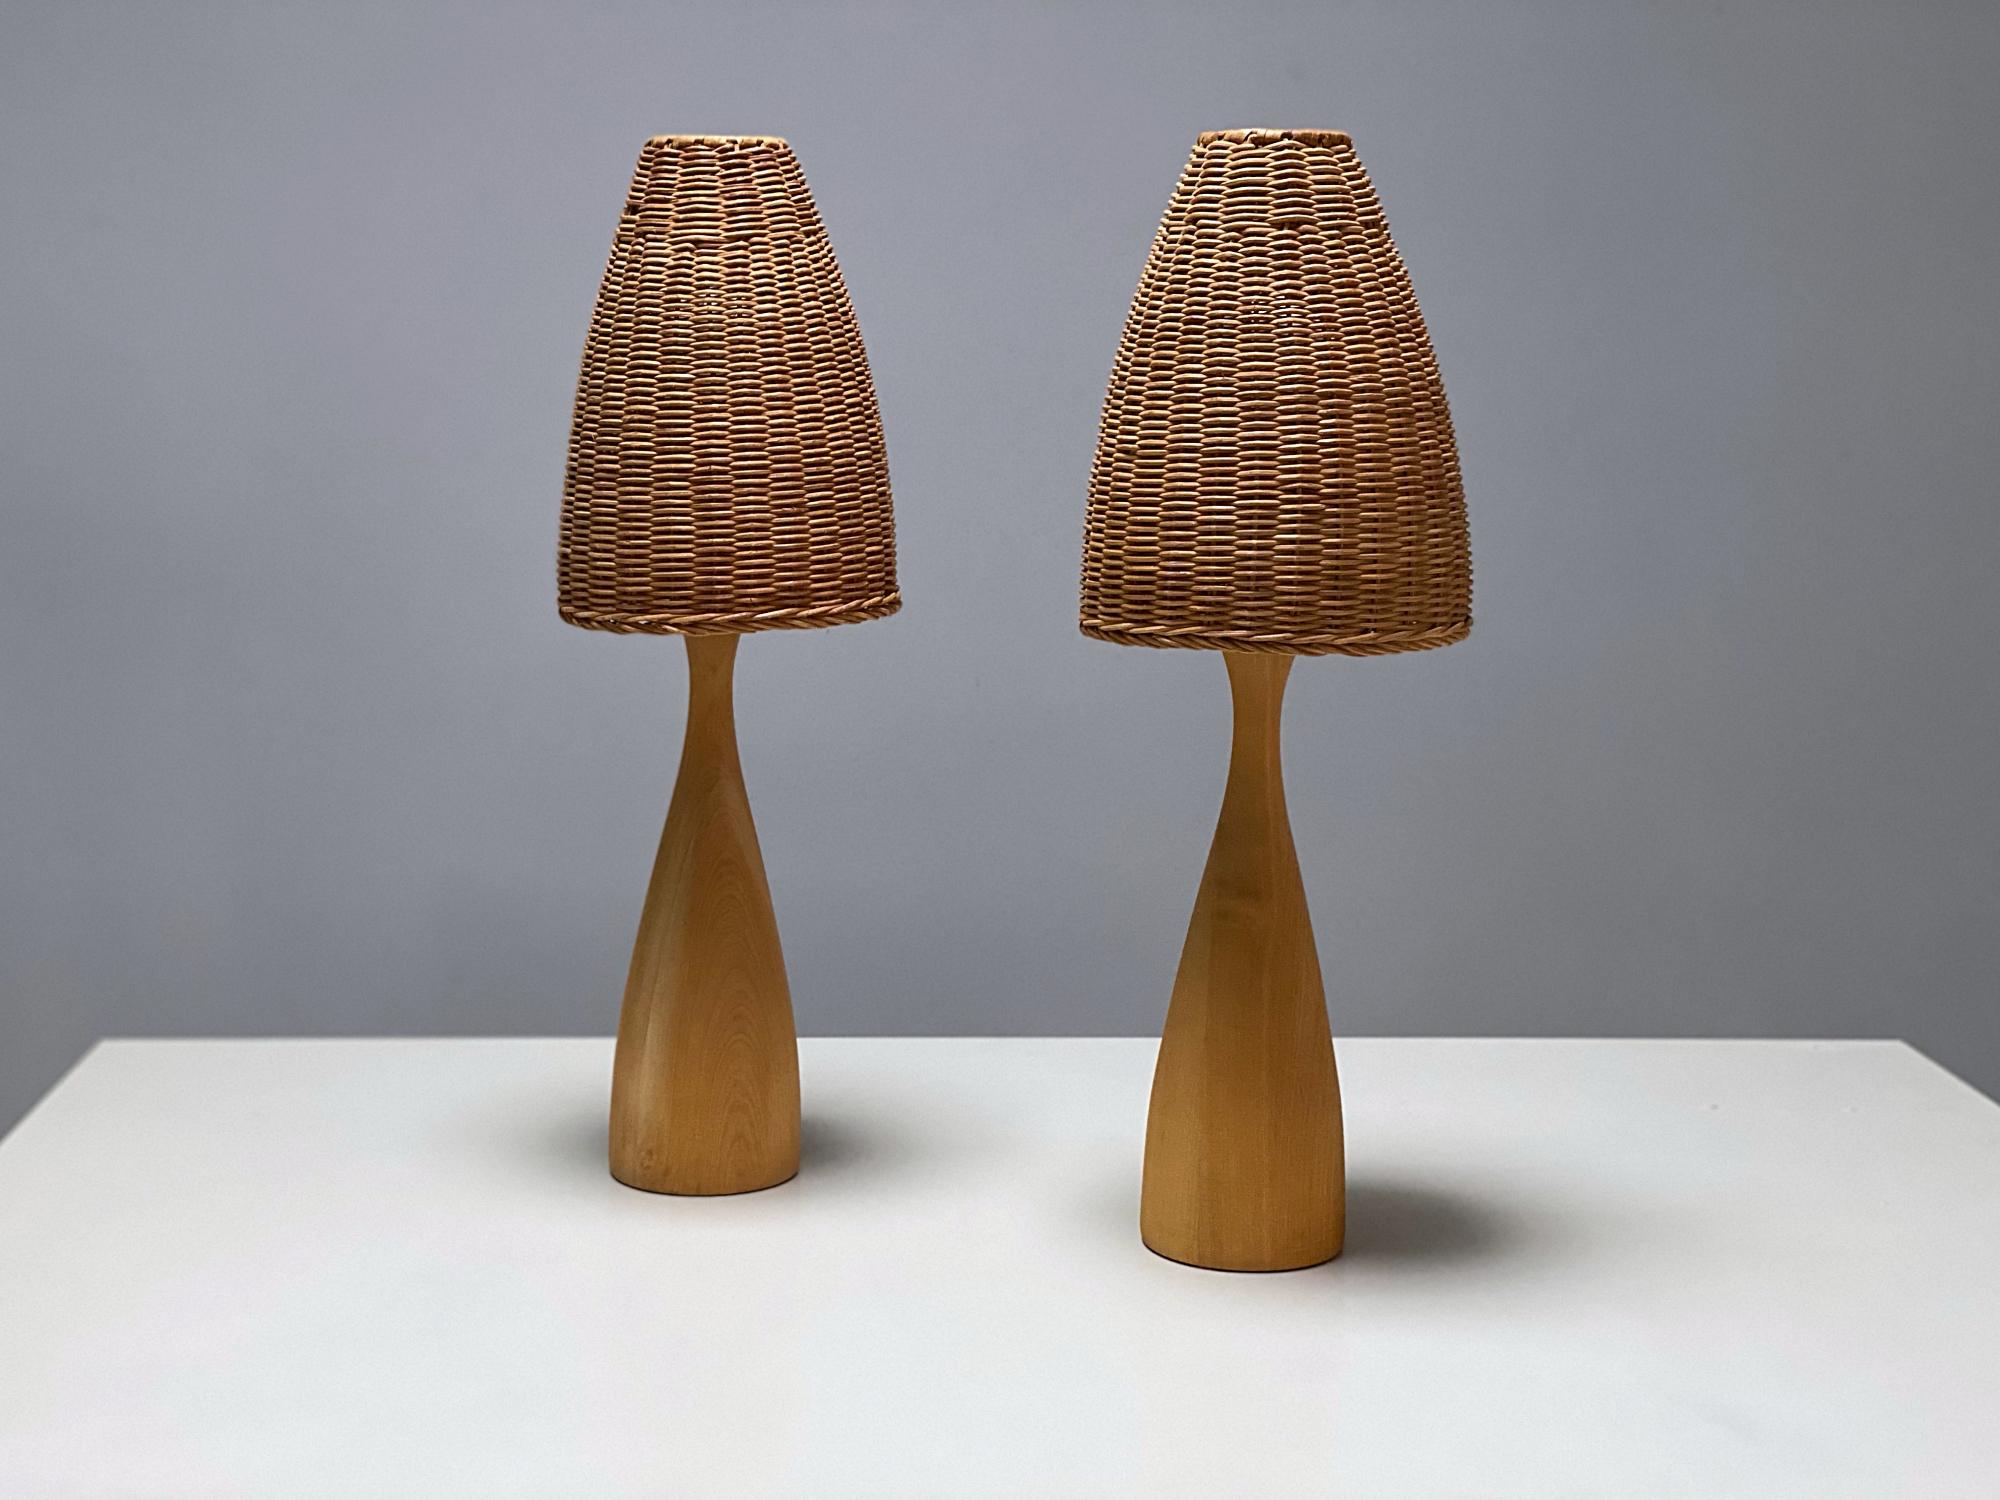 Pair of very elegant Scandinavian Modern table lamps manufactured in 1970s, Sweden. The lamps are made of solid walnut with rattan shades that provide a smooth and wonderful light. The lamps are in very good condition, fully working and tested. One